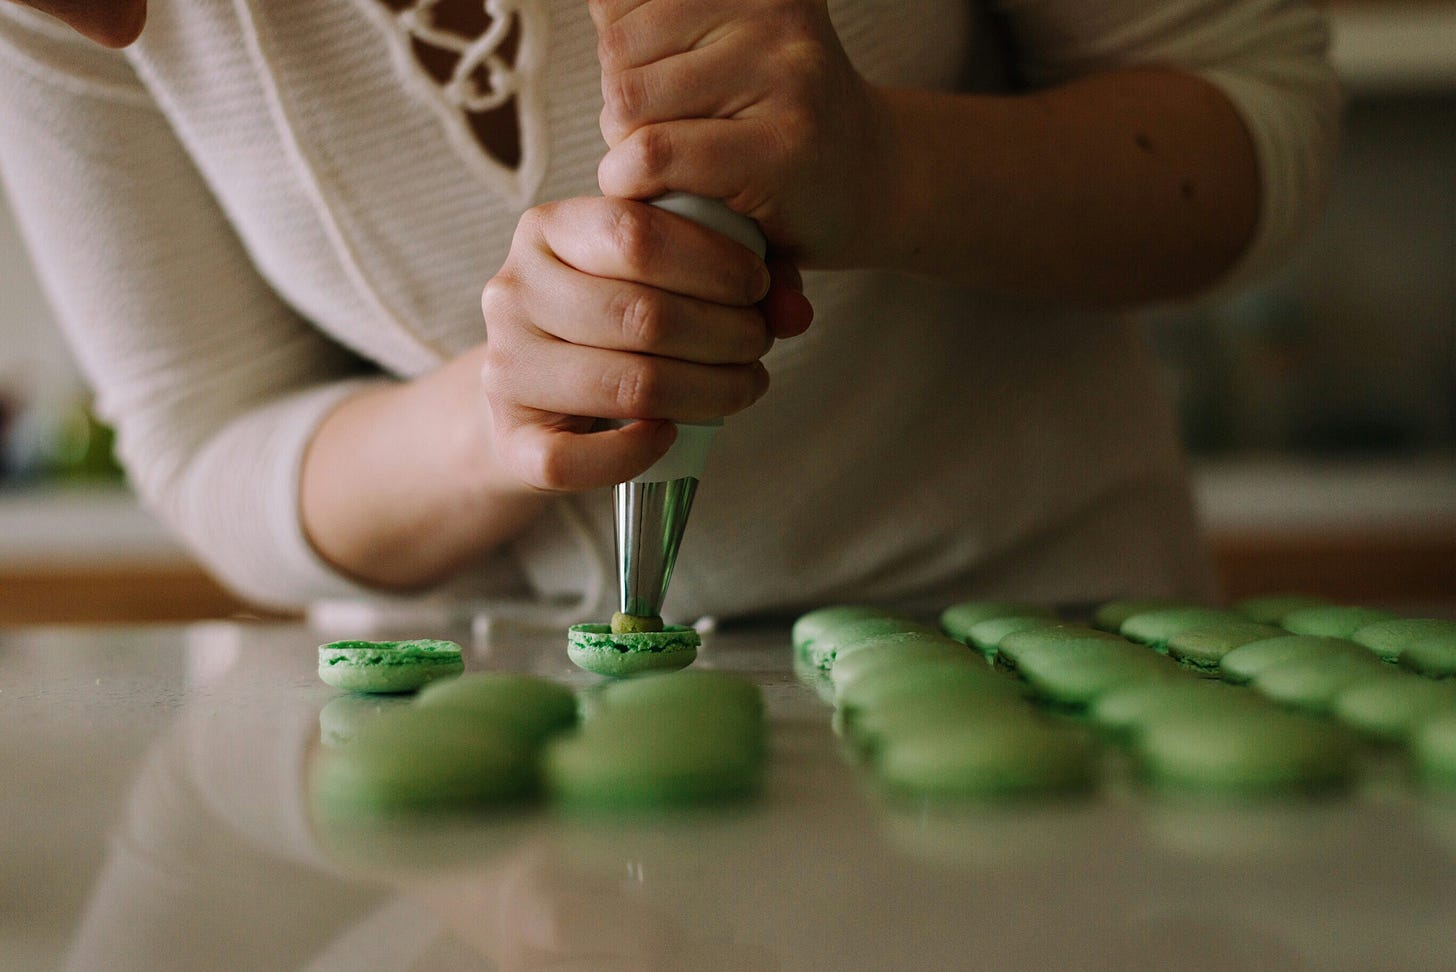 A woman pipes icing on to macarons